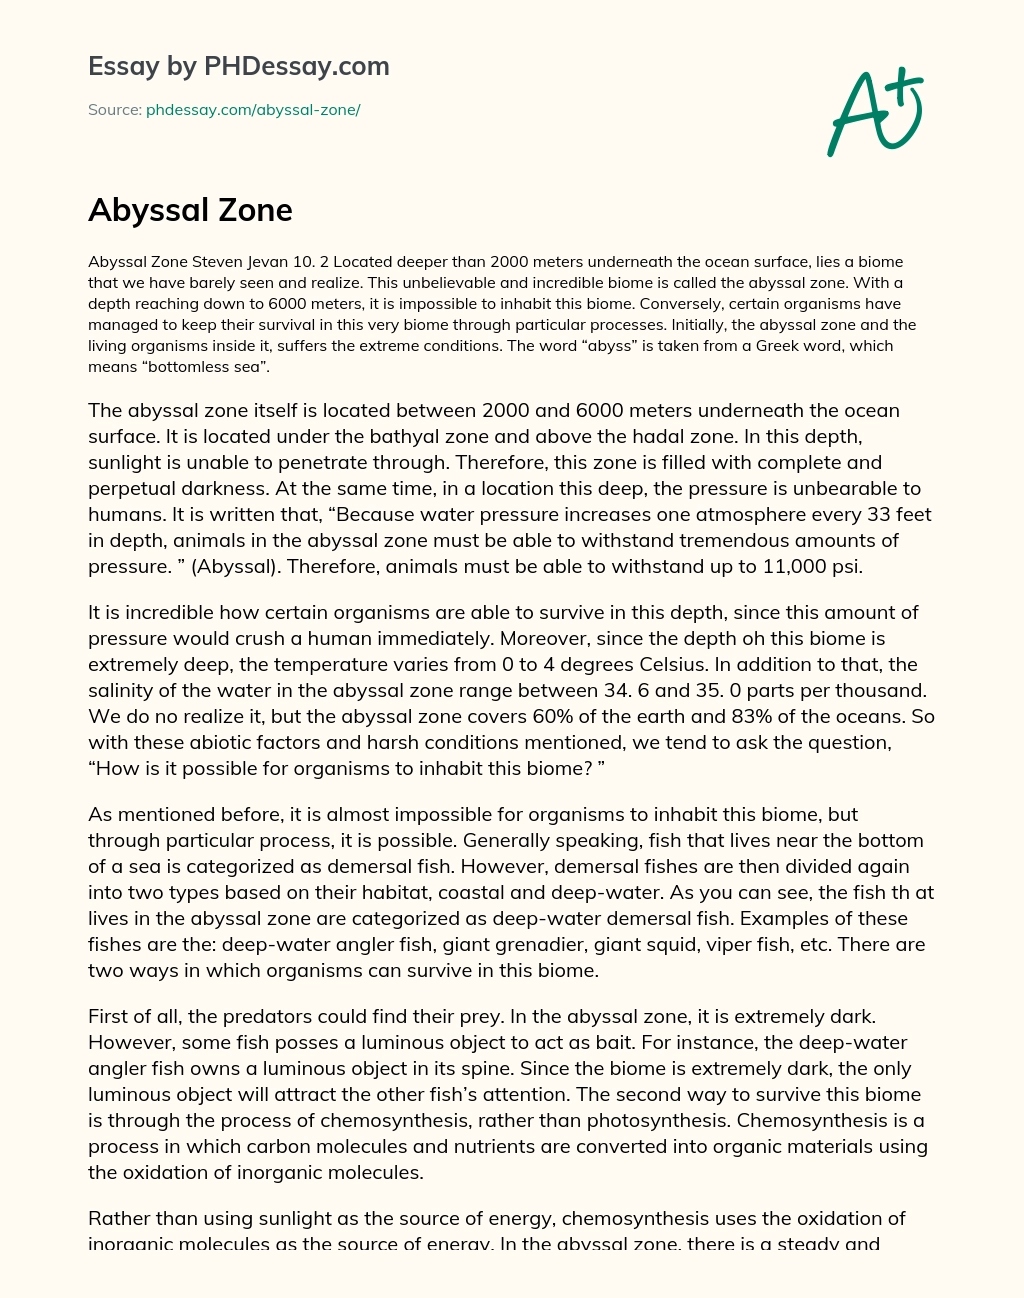 Exploring the Mysterious Abyssal Zone: Life at Extreme Depths essay